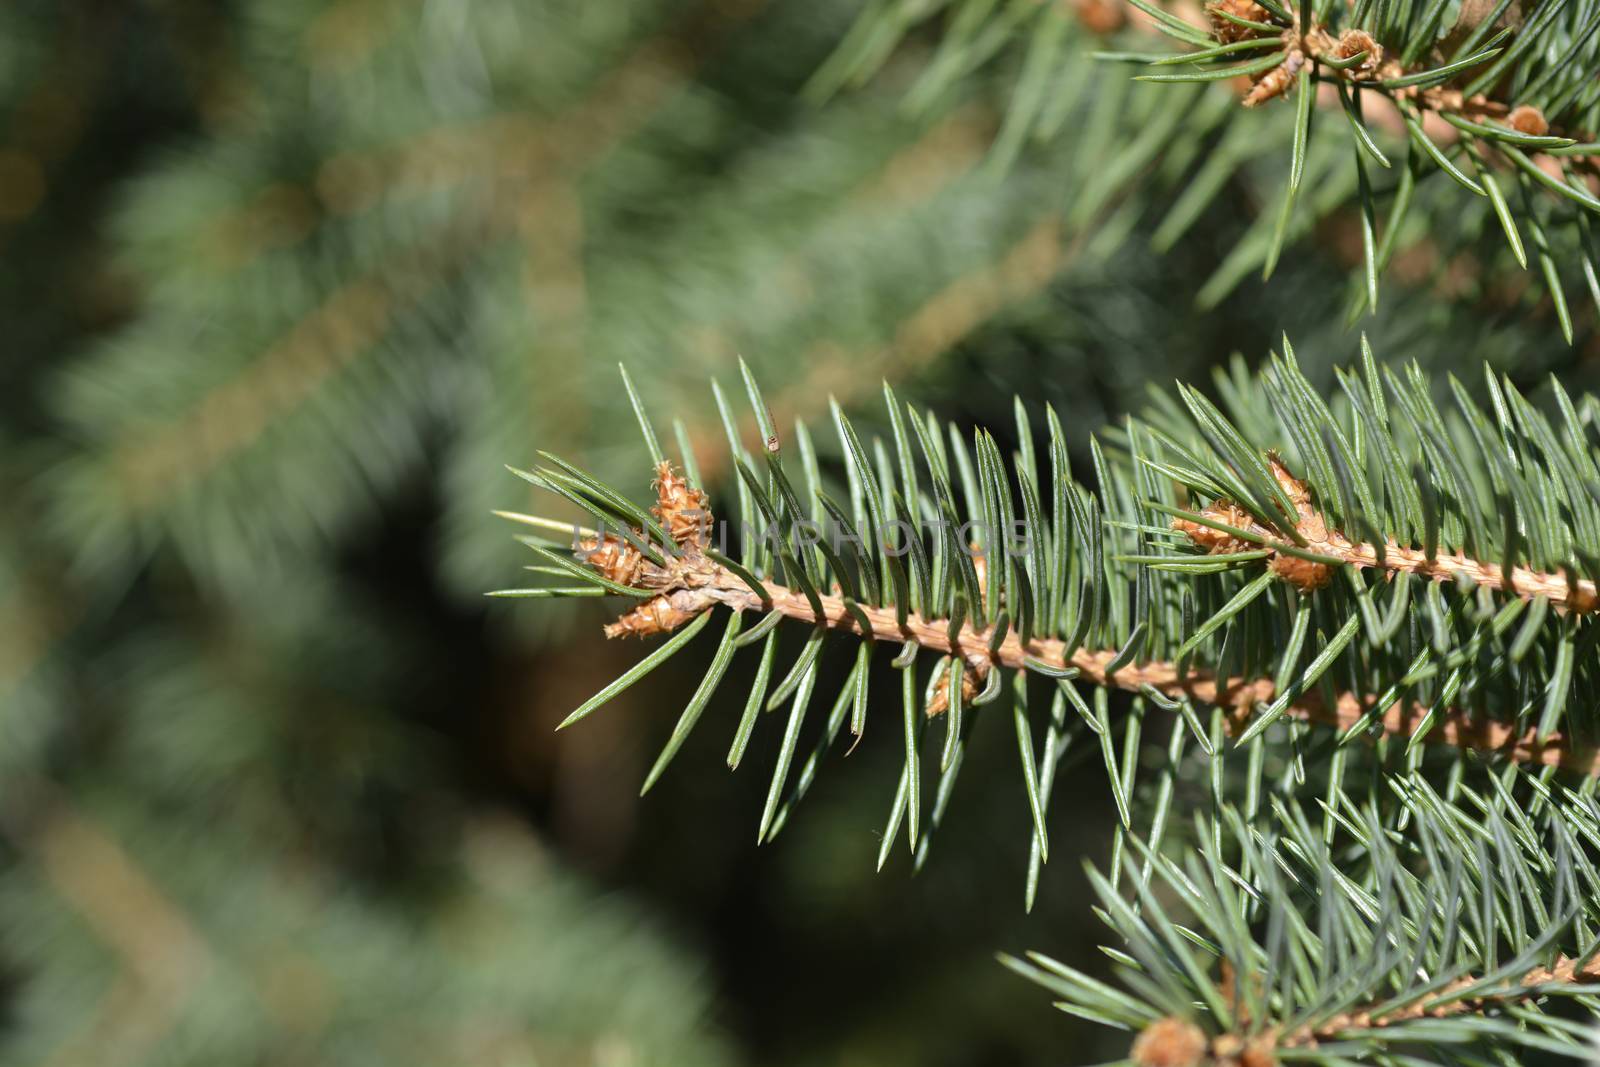 Norway spruce by nahhan